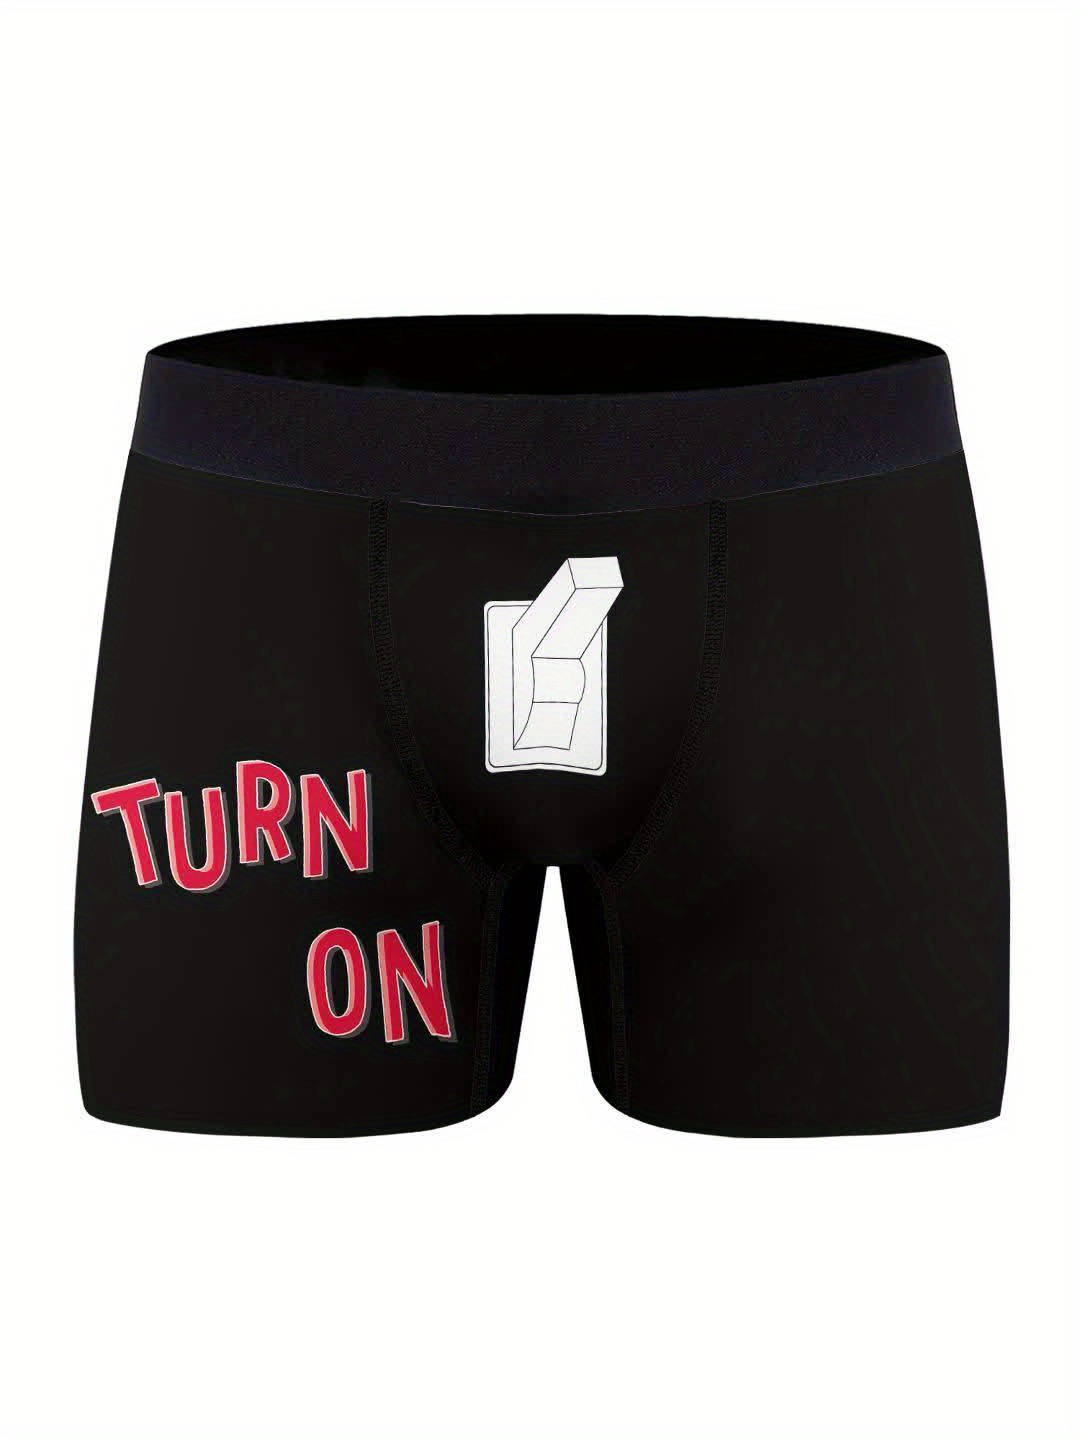 Men's 'Turn Me On' Print Fashion Breathable Comfortable Boxer Briefs  Novelty Funny Cool Underwear